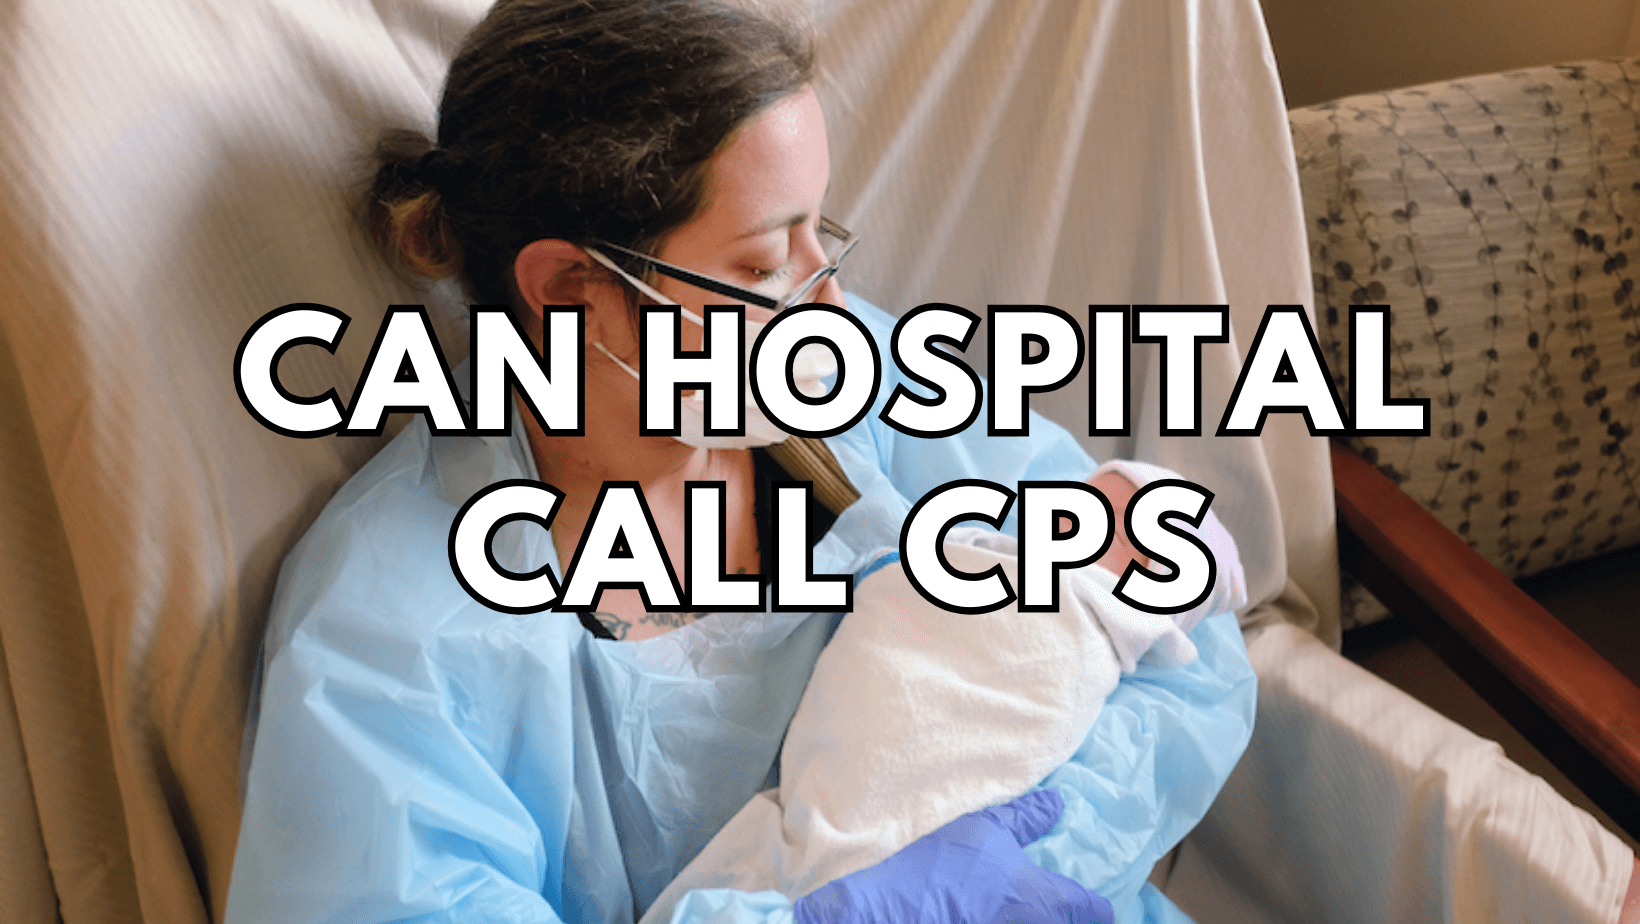 can hospital call cps featured image